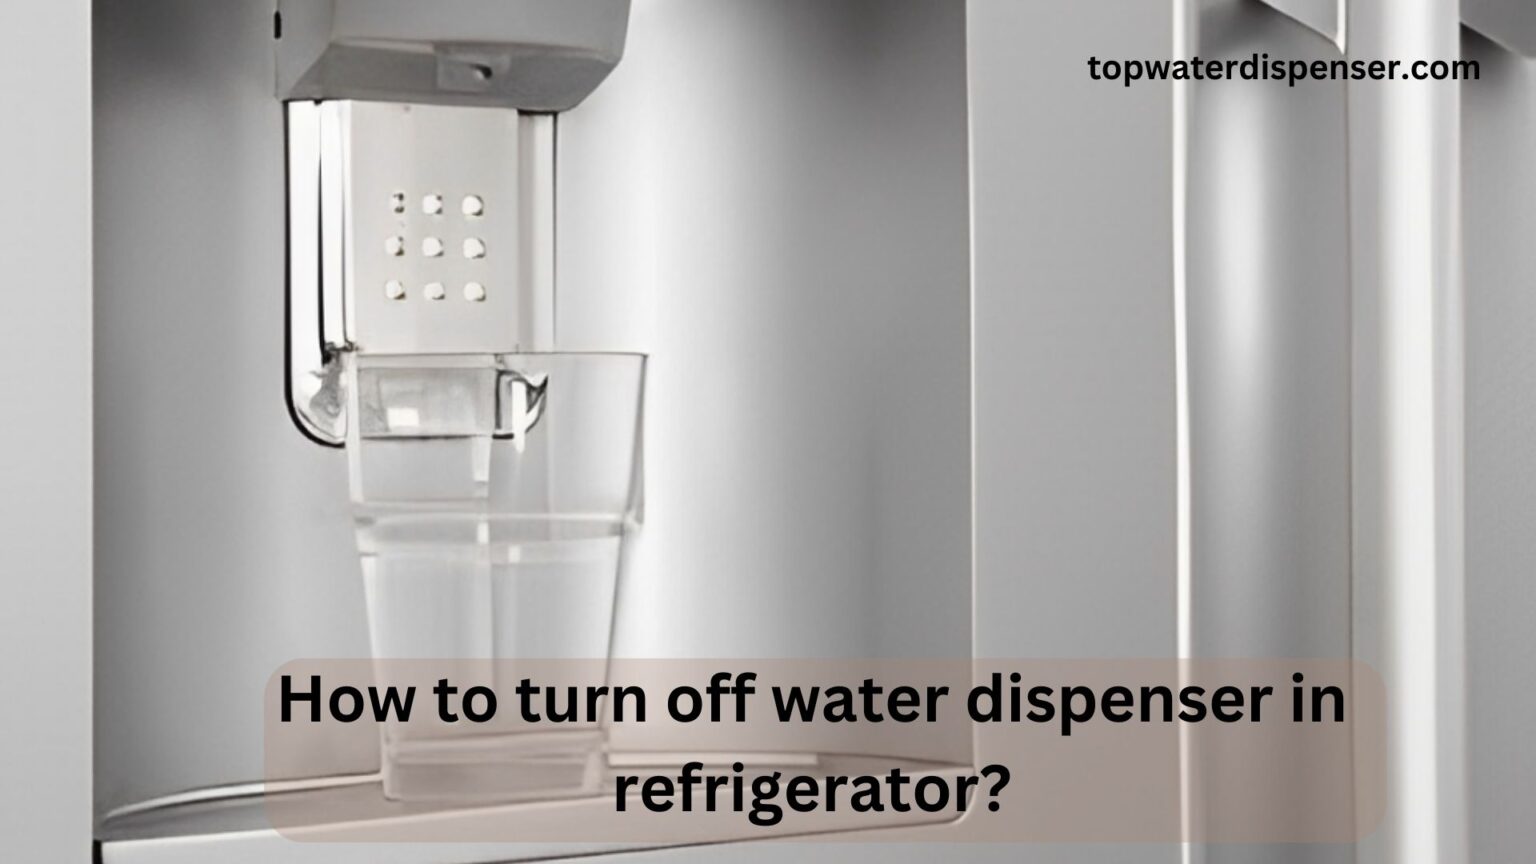 How to turn off water dispenser in refrigerator?